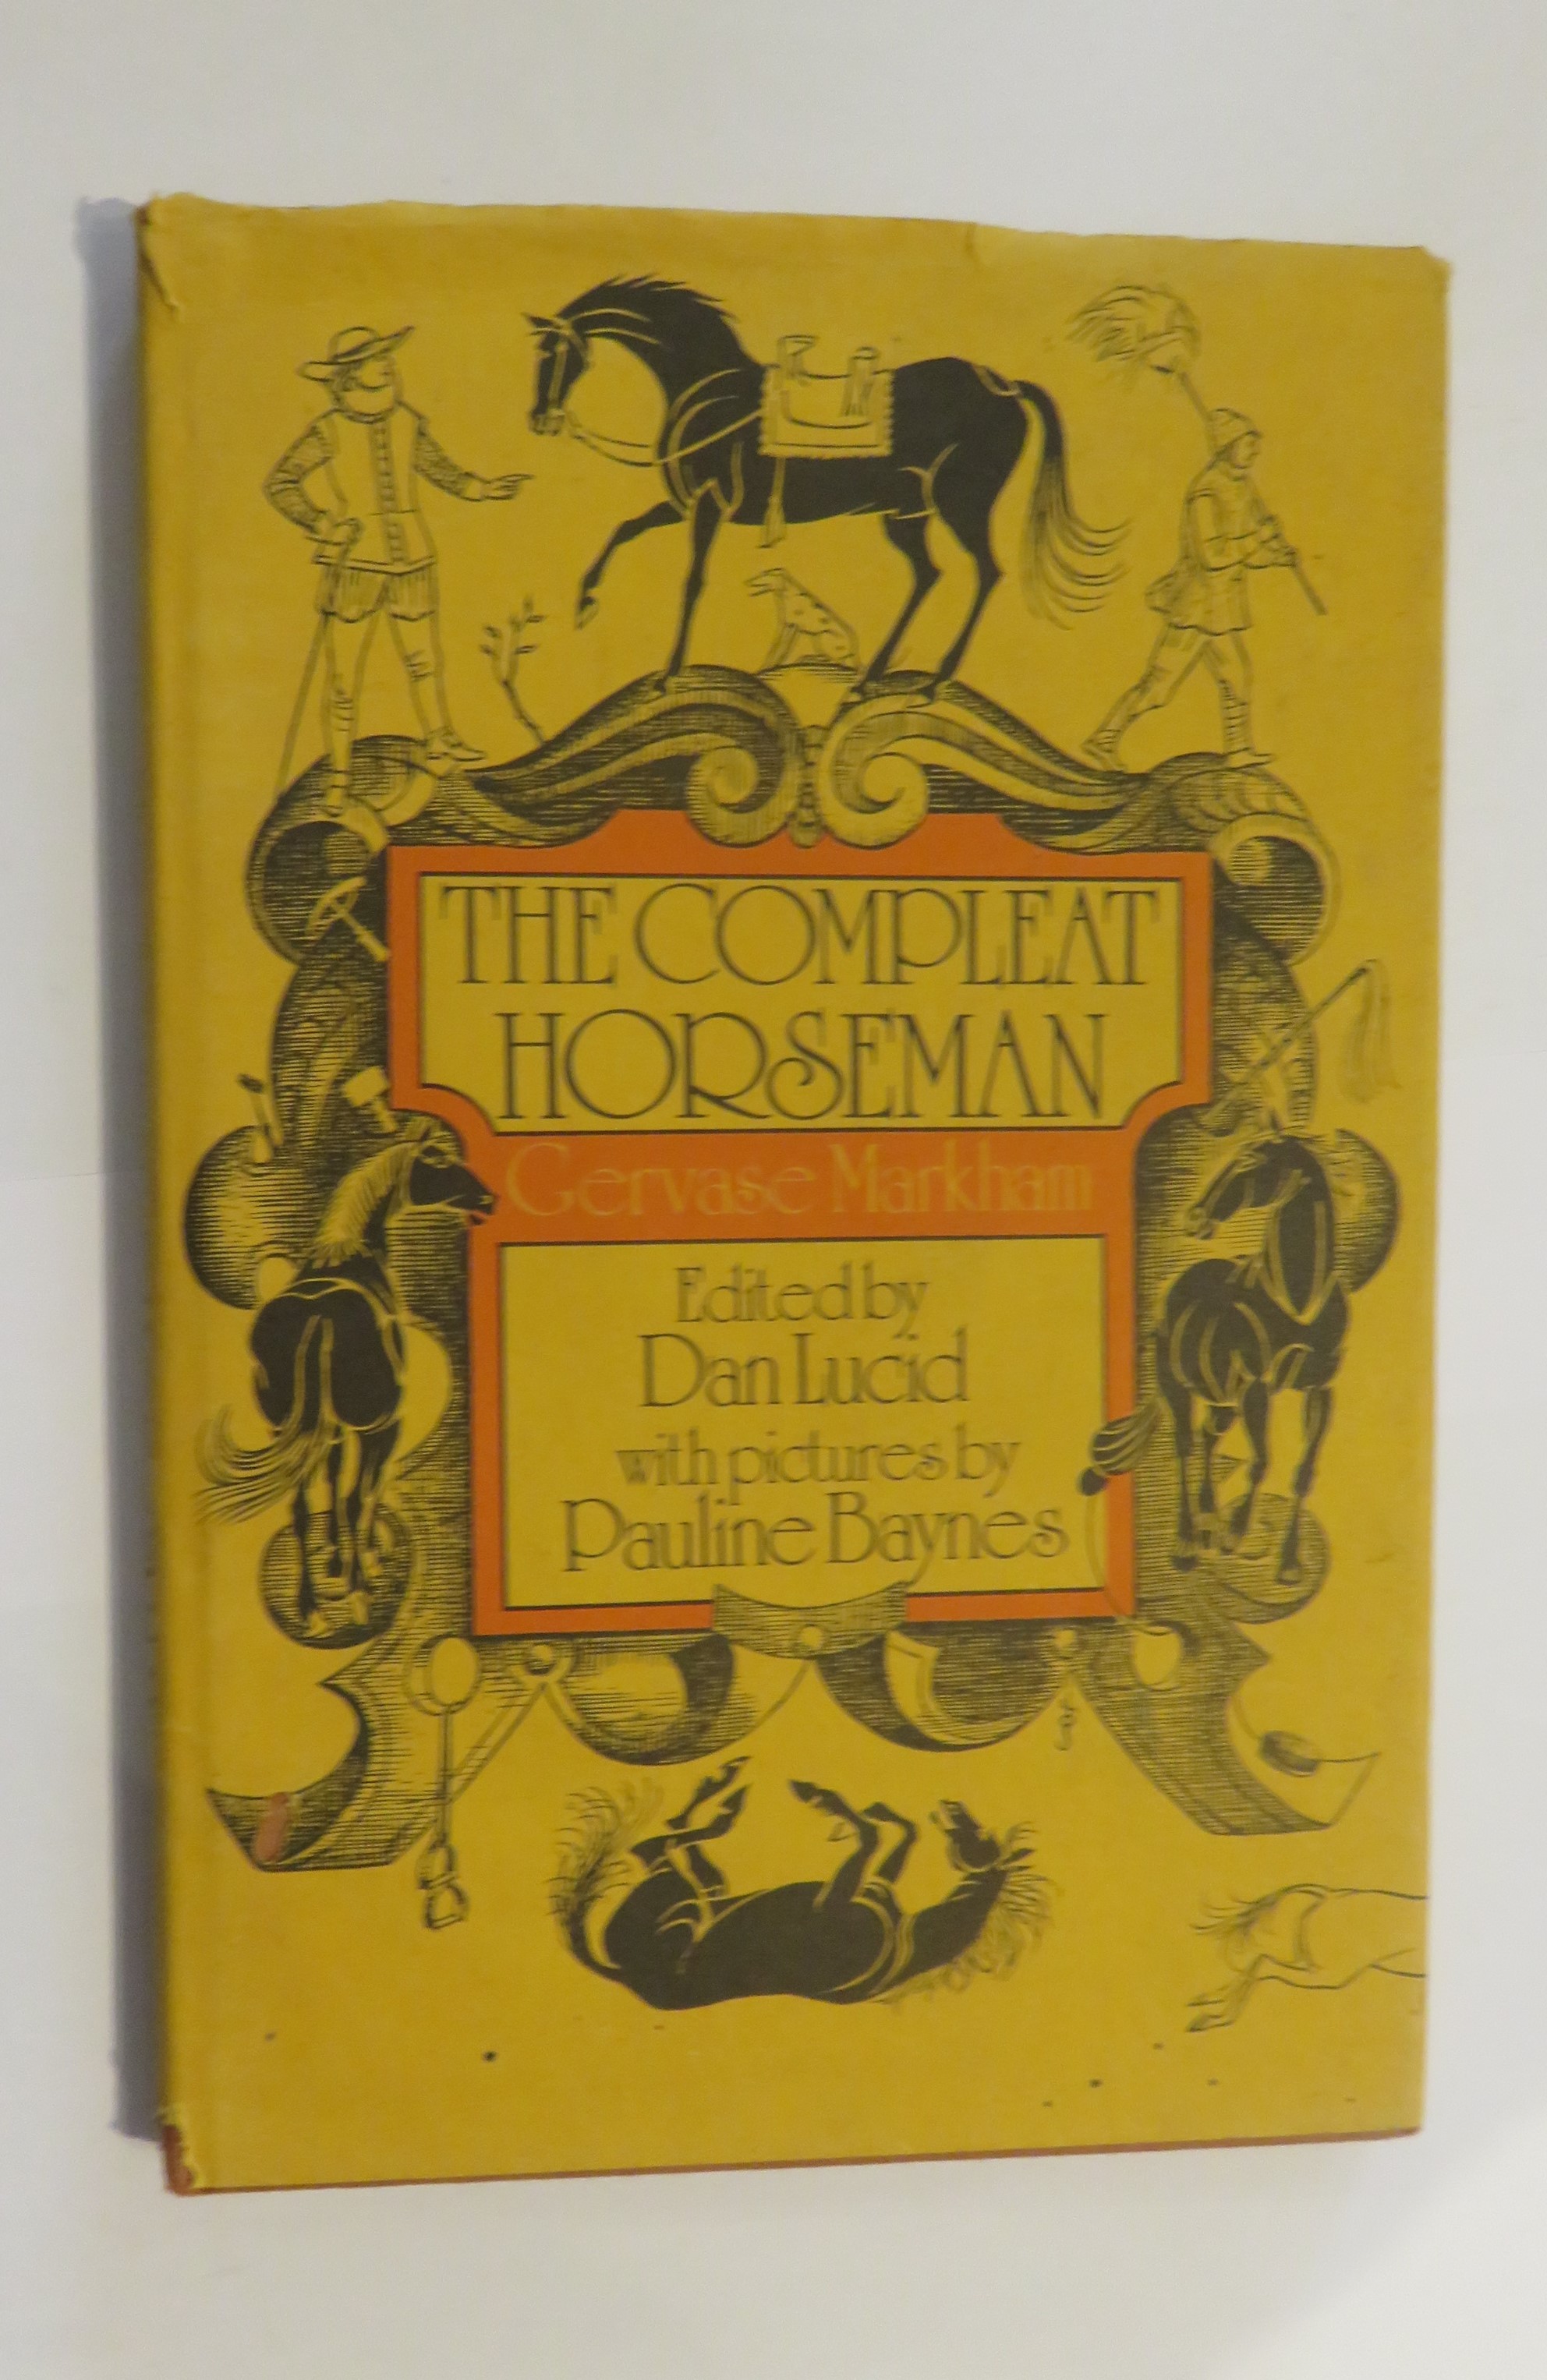 The Compleat Horseman